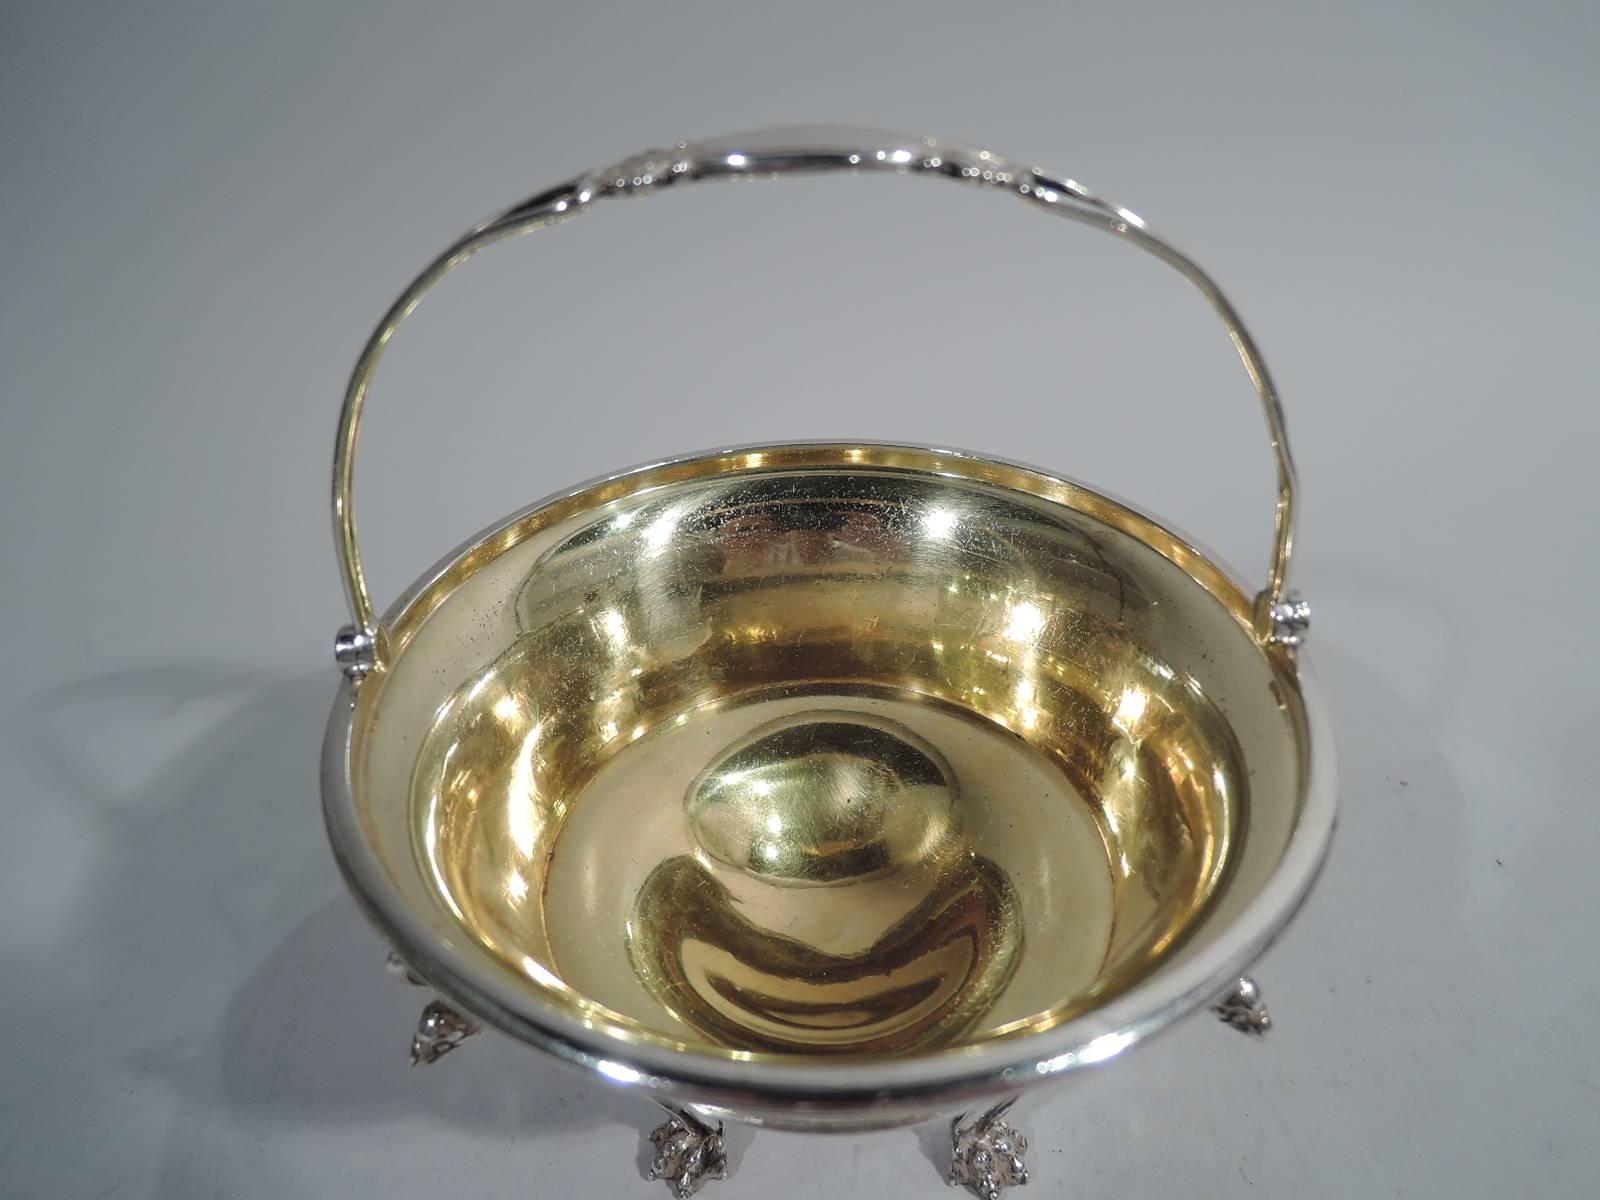 Greek Revival sterling silver basket. Made by Tiffany & Co. in New York. Bowl has tapering sides and gilt interior. On exterior is an engraved frieze on butler-finished ground in style of an ancient pot with horsemen and philosophers in Classical